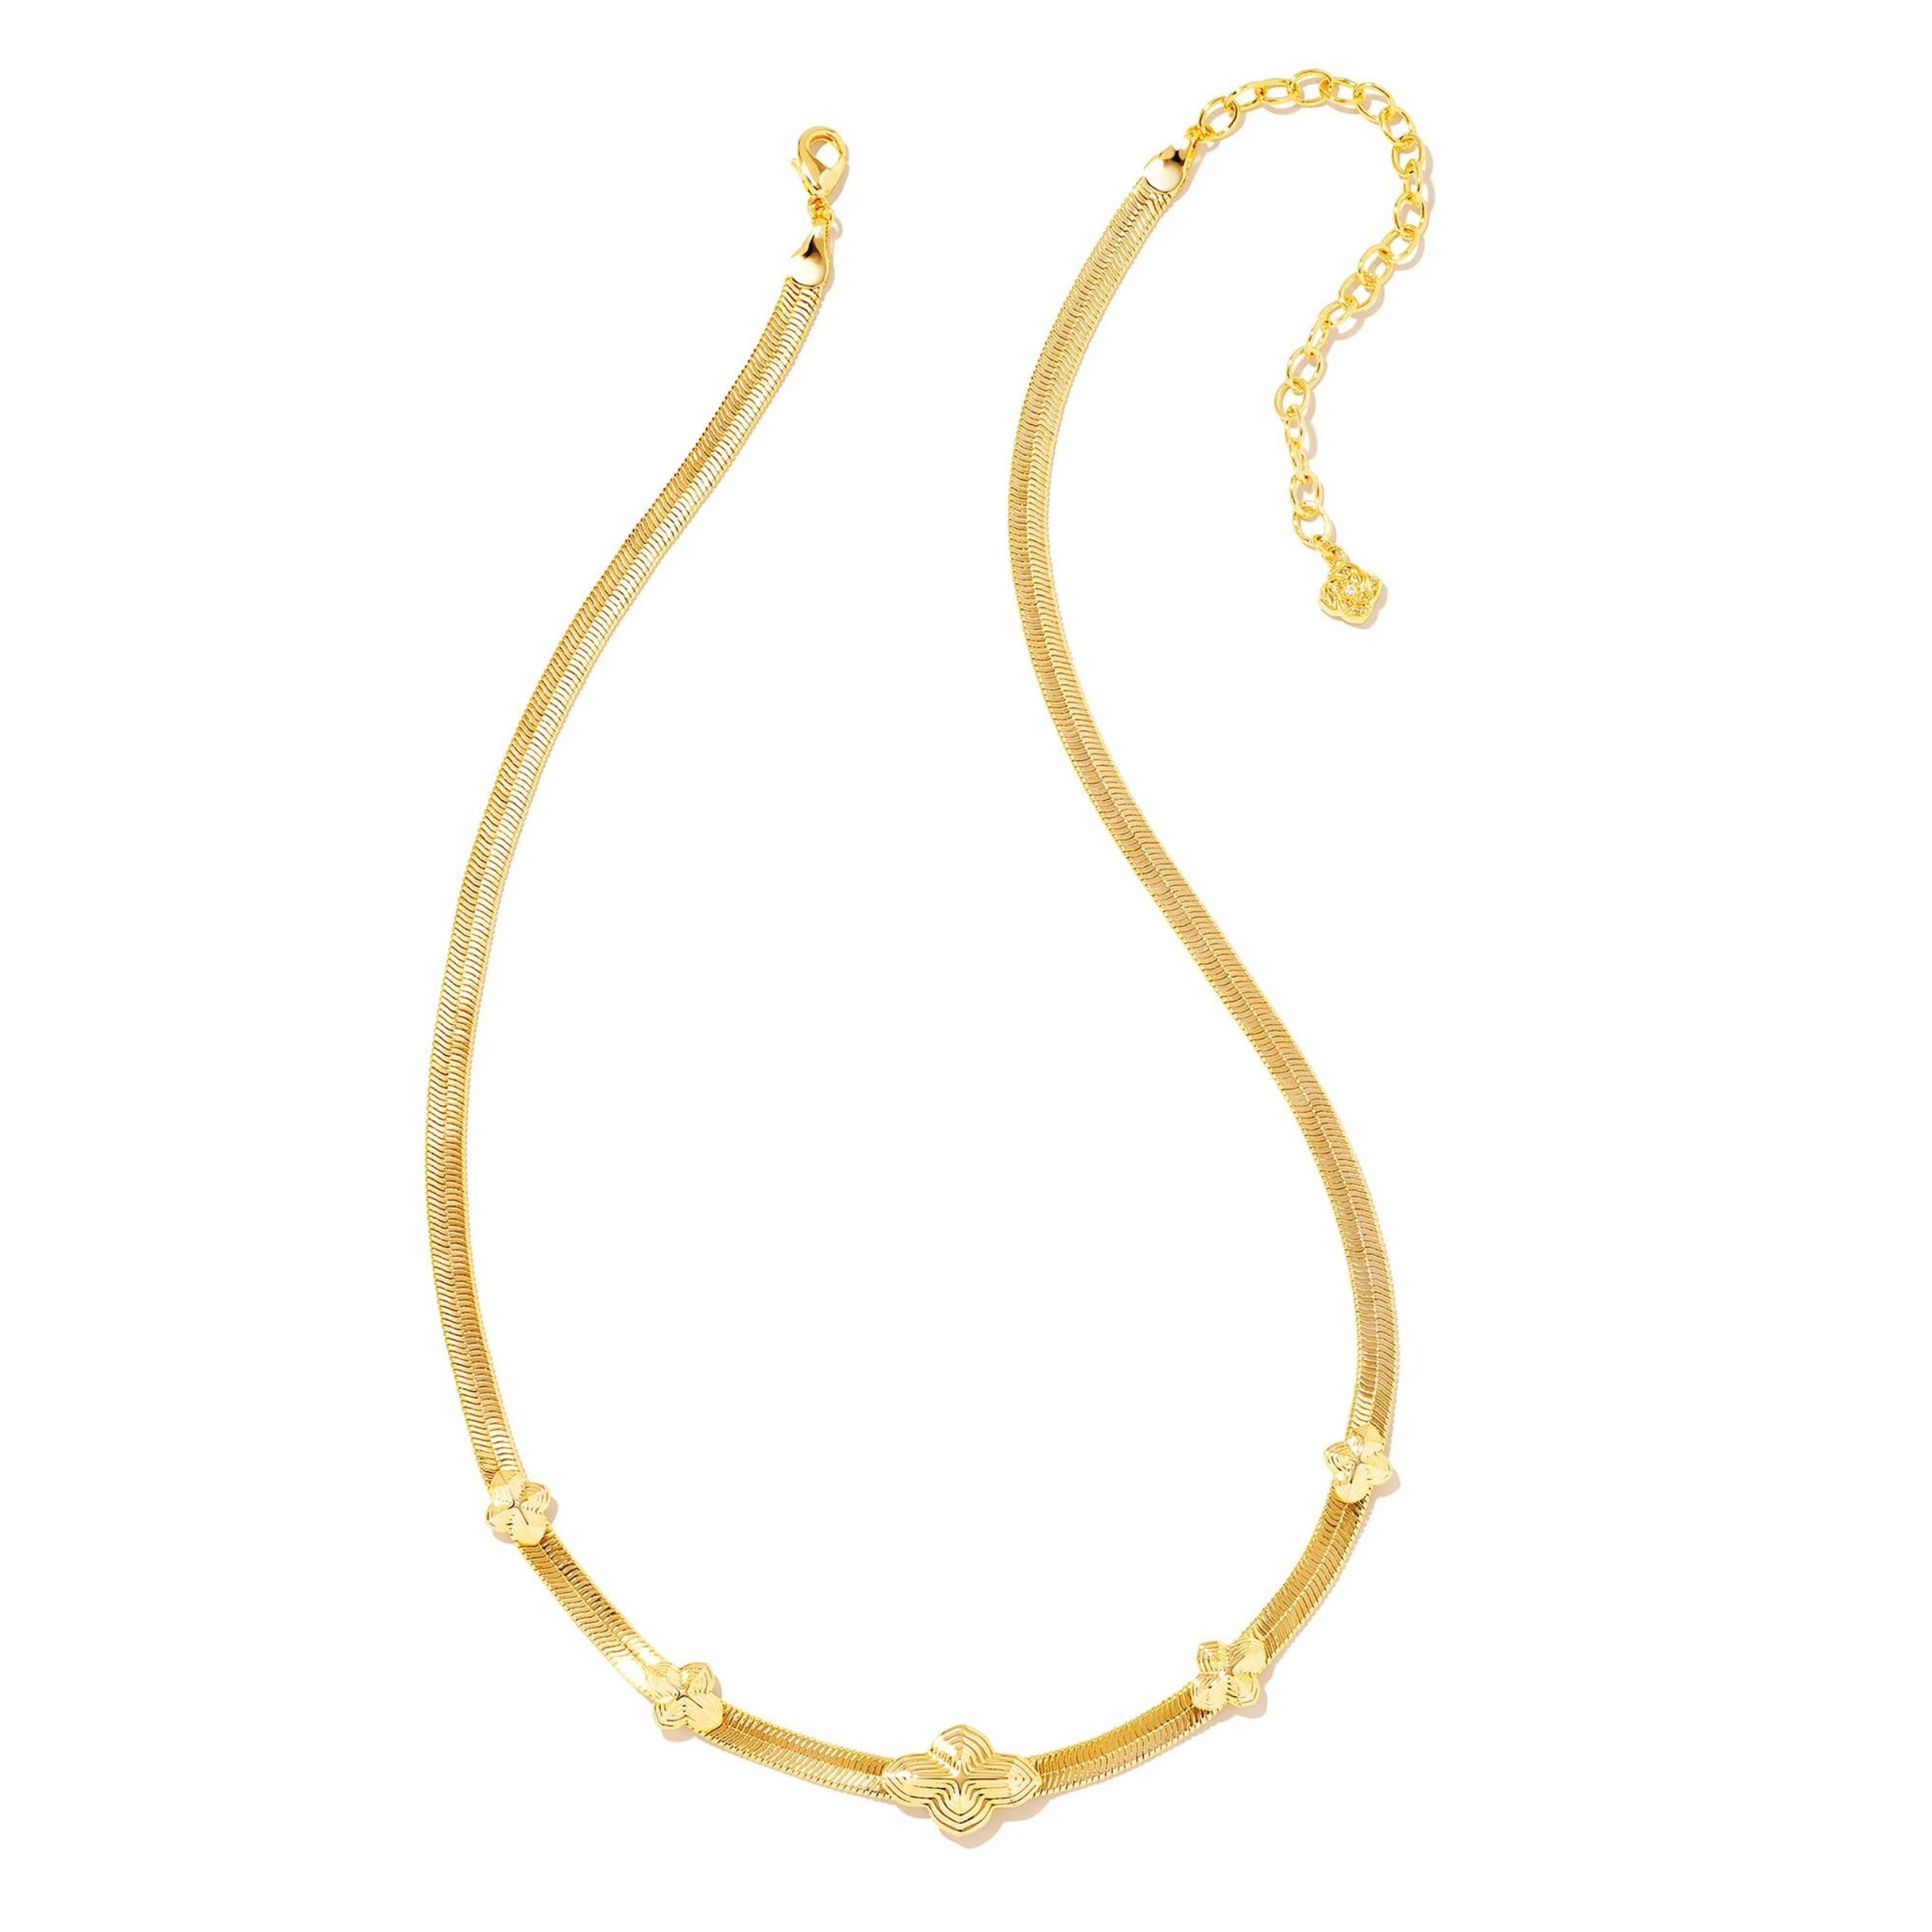 Kendra Scott | Abbie Herringbone Necklace in Gold - Giddy Up Glamour Boutique